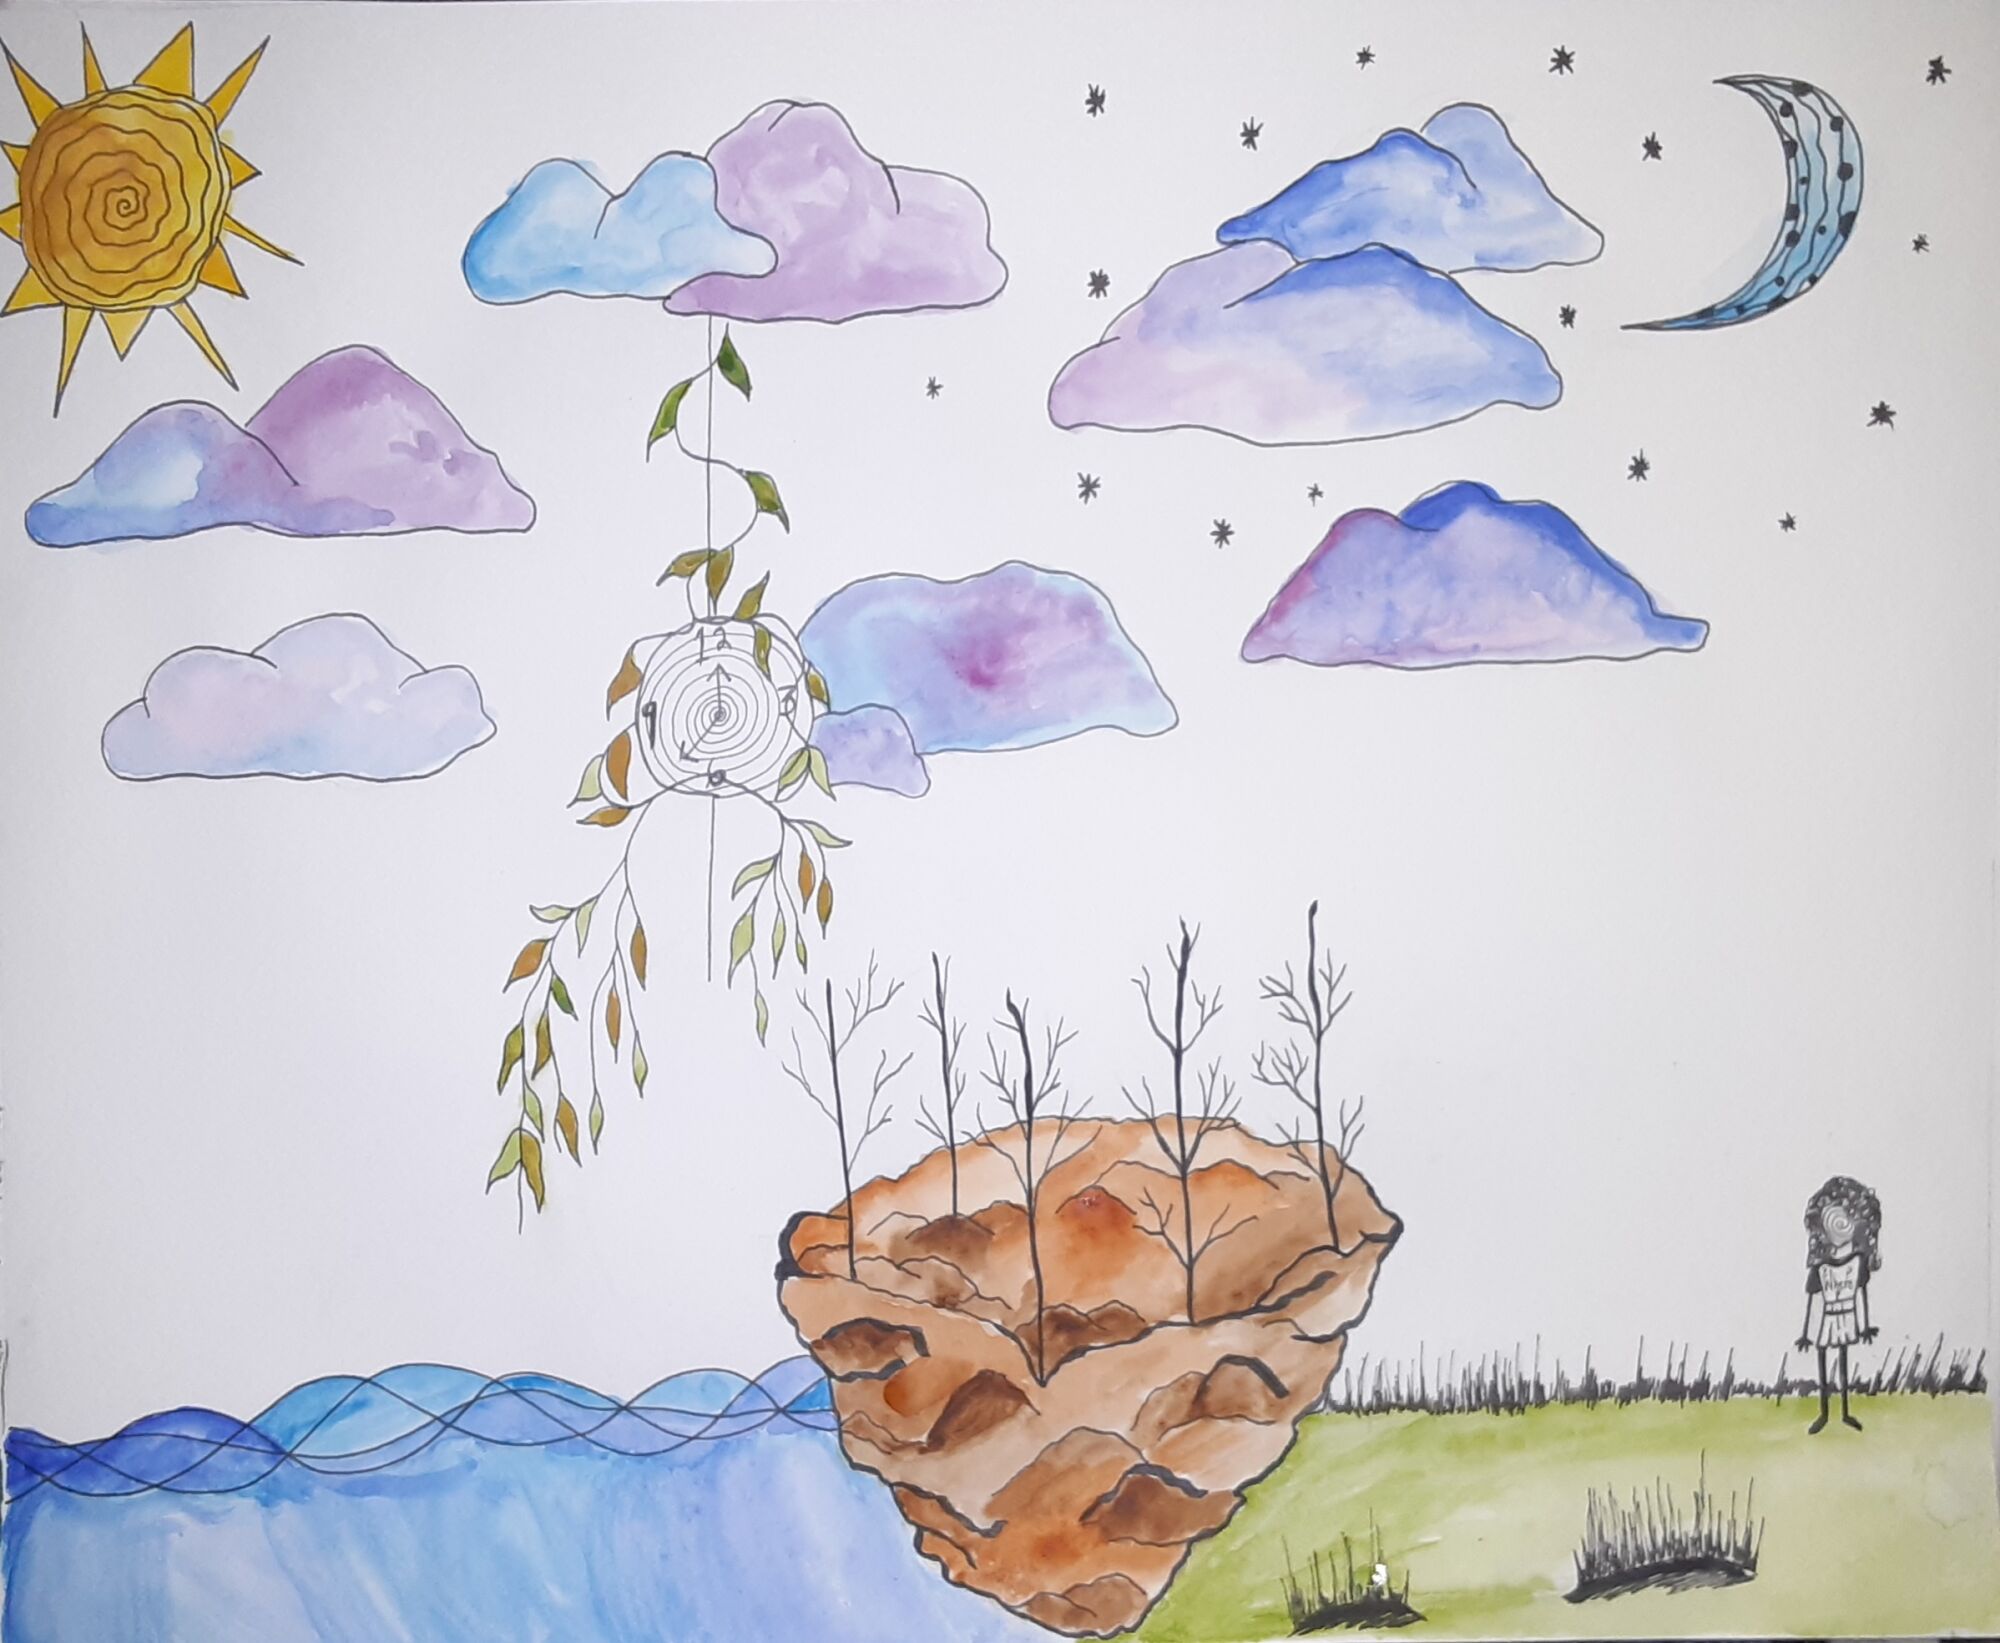 Watercolor of a girl in nature beside an earthen boat lined with leafless trees, below blue and purple clouds